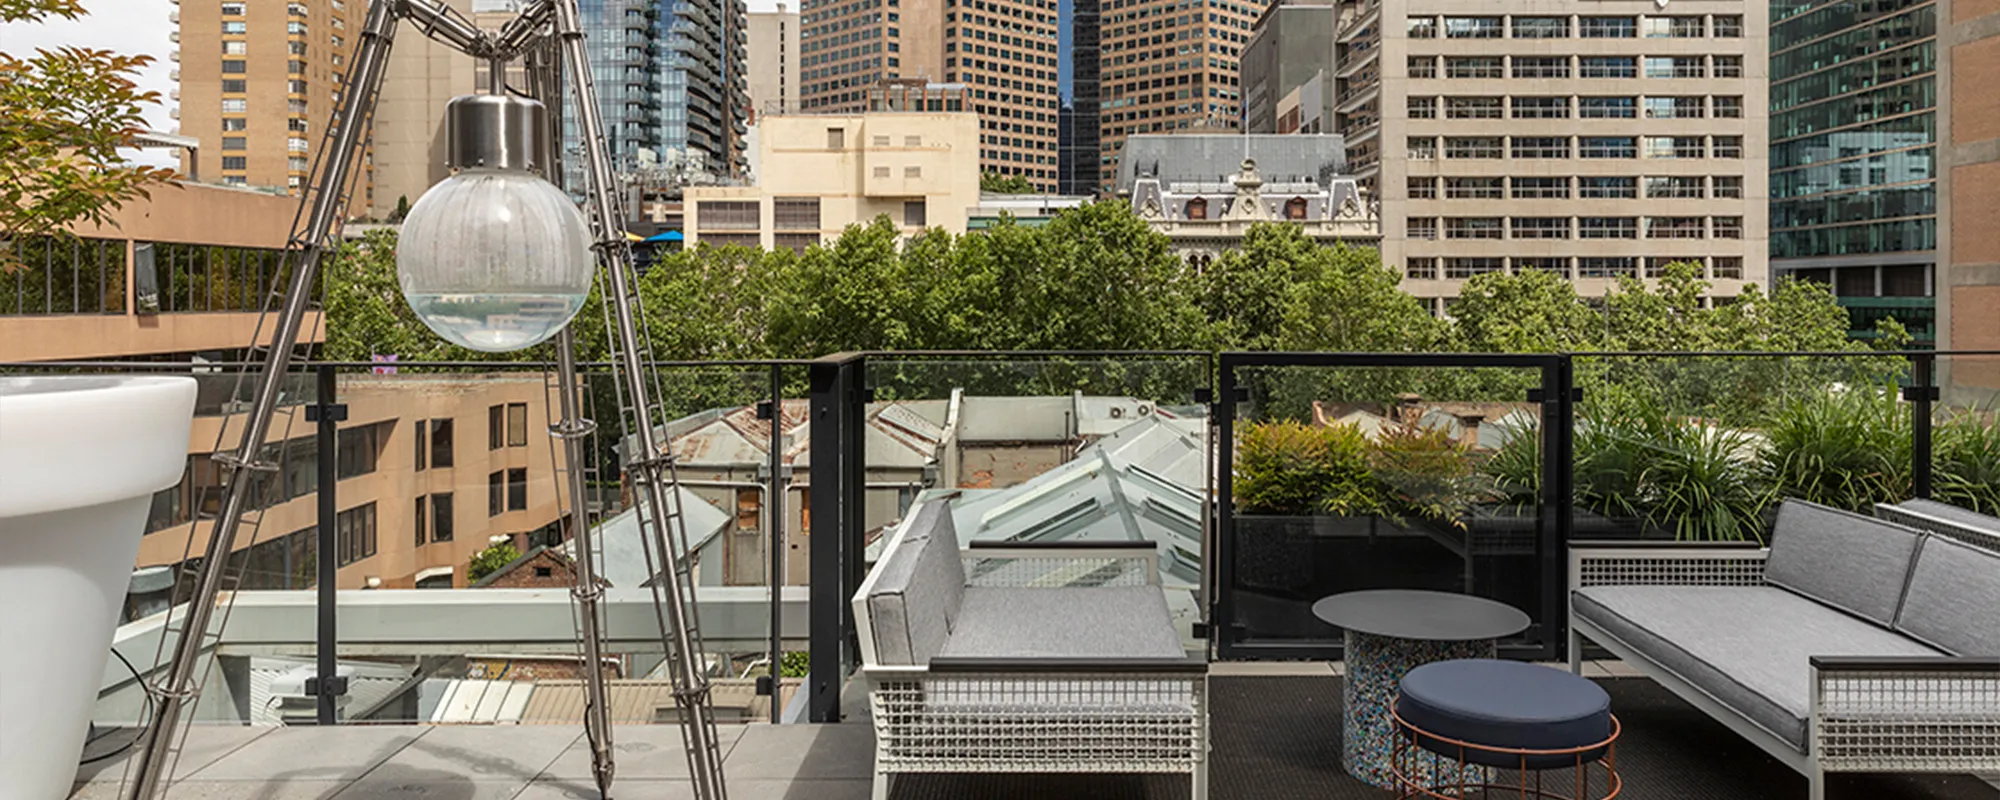 Lancemore Crossley st Boutique Luxury Accommodations Melbourne rooftop terrace Events 2000 x 800 8